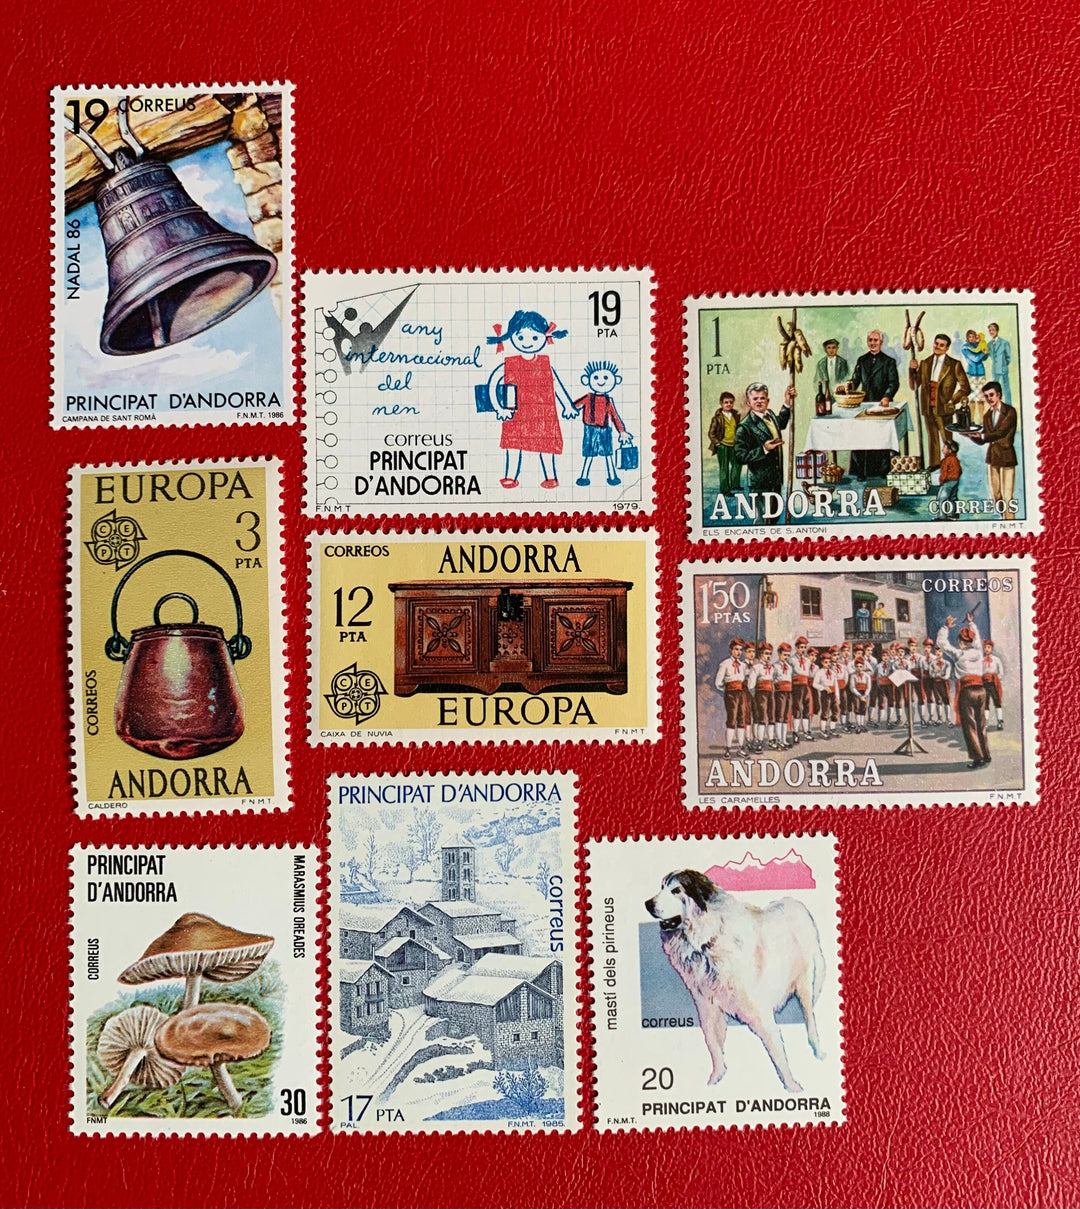 Spanish Andorra - Original Vintage Postage Stamps- 1970s-80s mixed lot- for the collector, artist or crafter - scrapbooks, decoupage